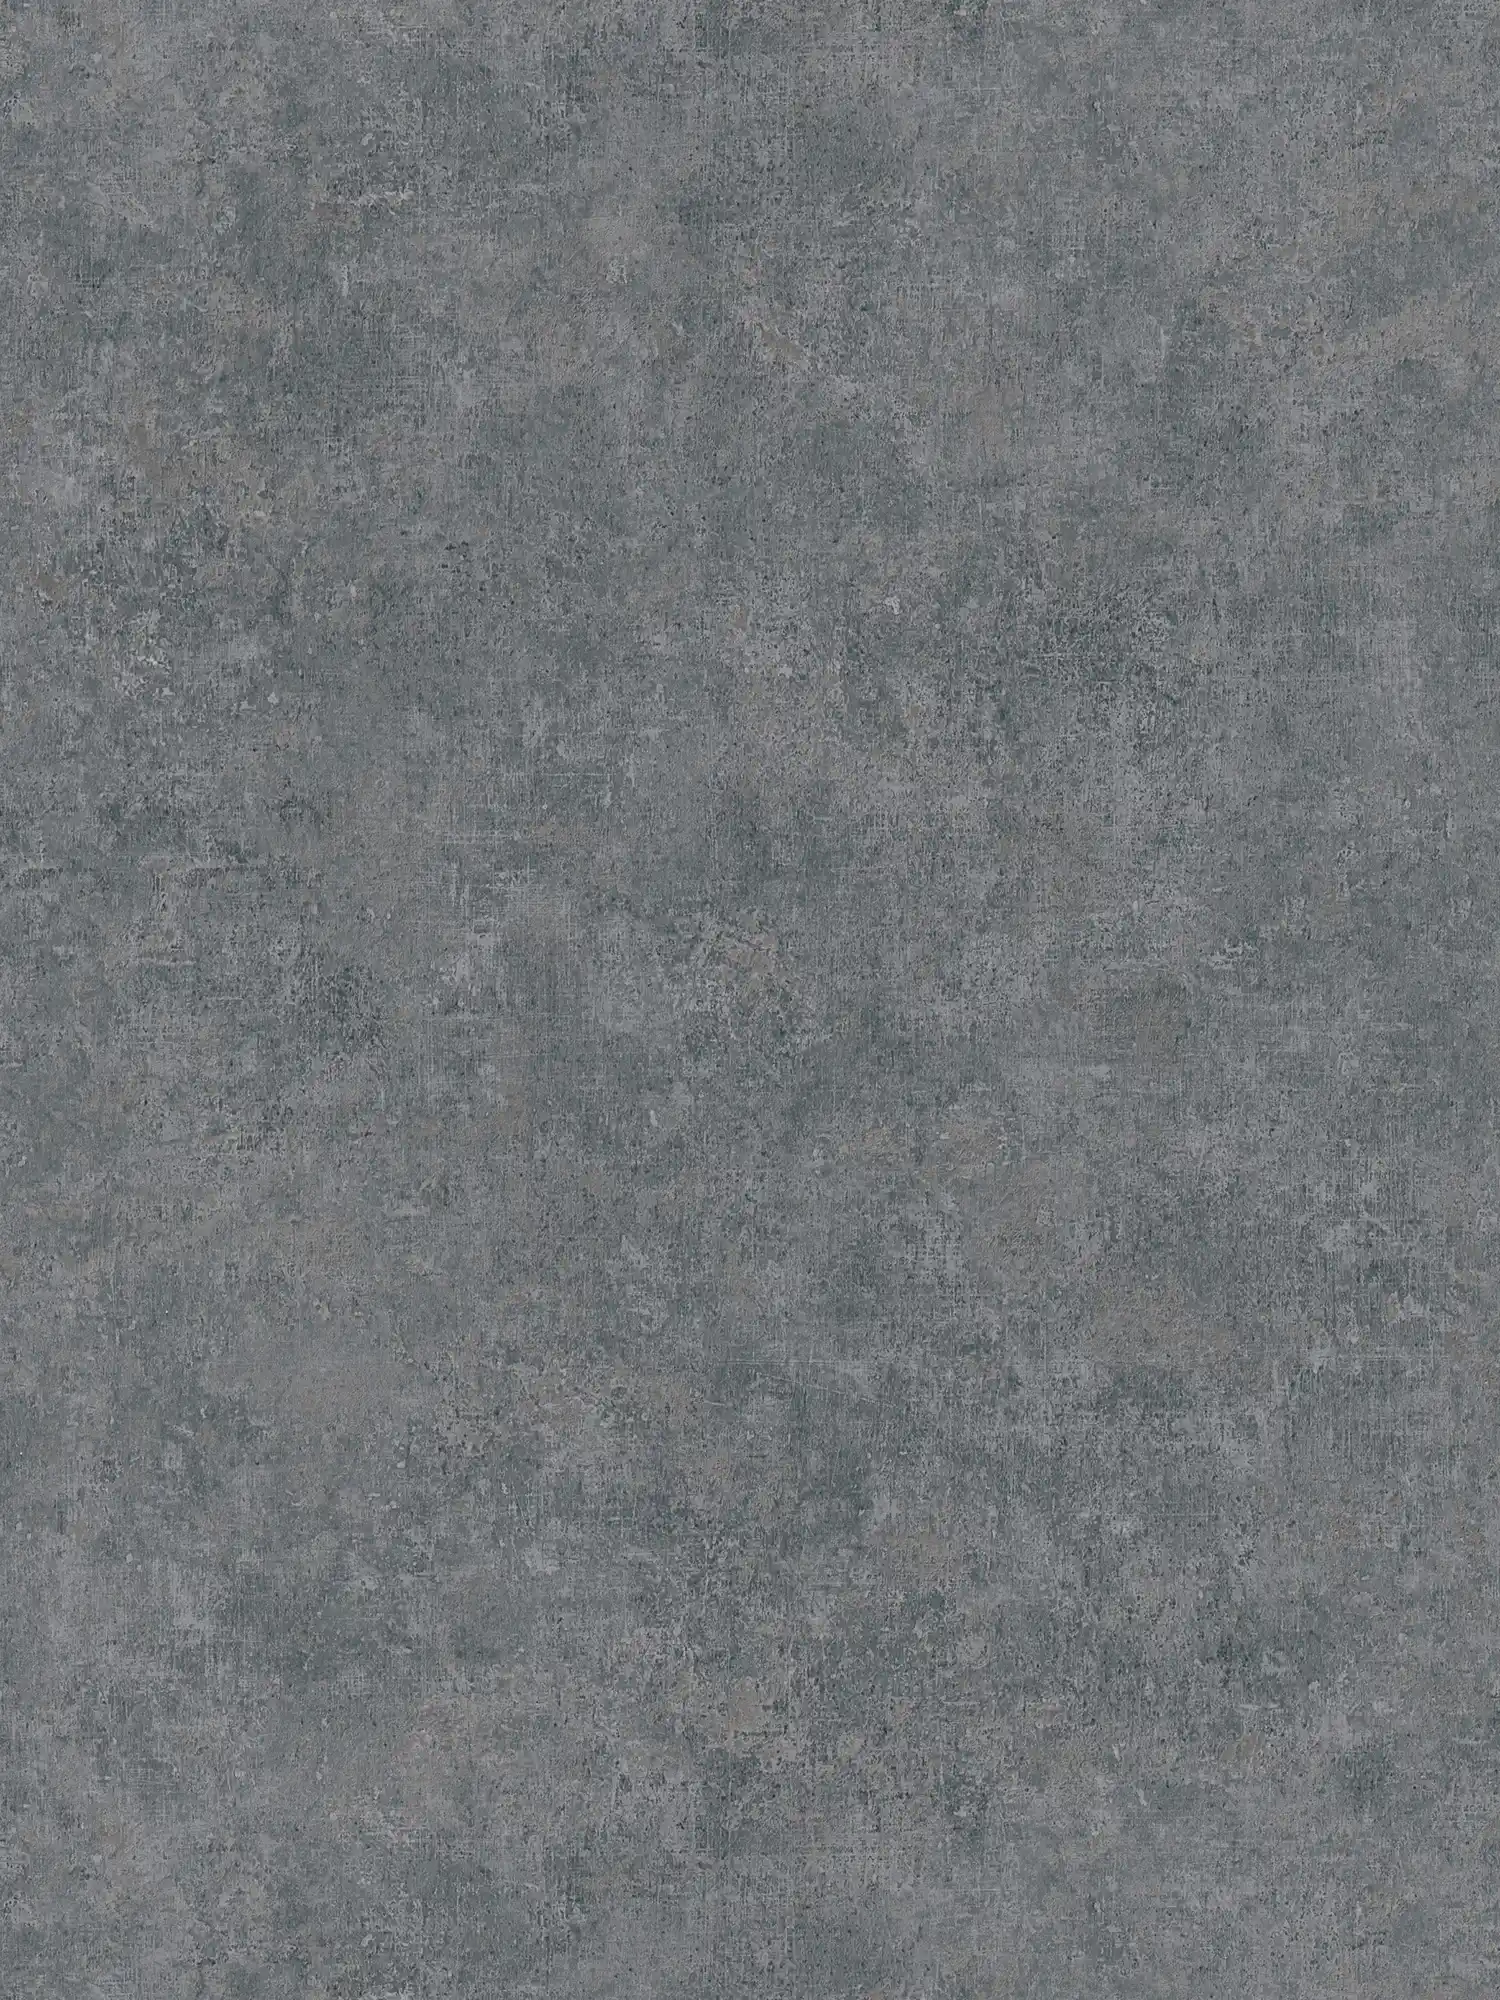 Non-woven wallpaper with tone-on-tone pattern, used look - grey
